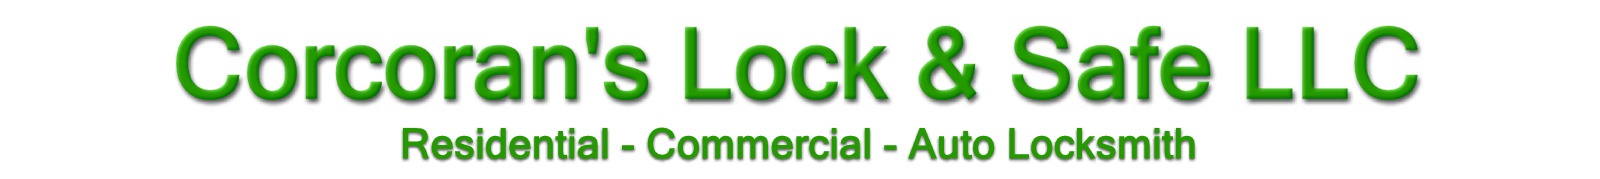 Corcorans Lock and Safe LLC